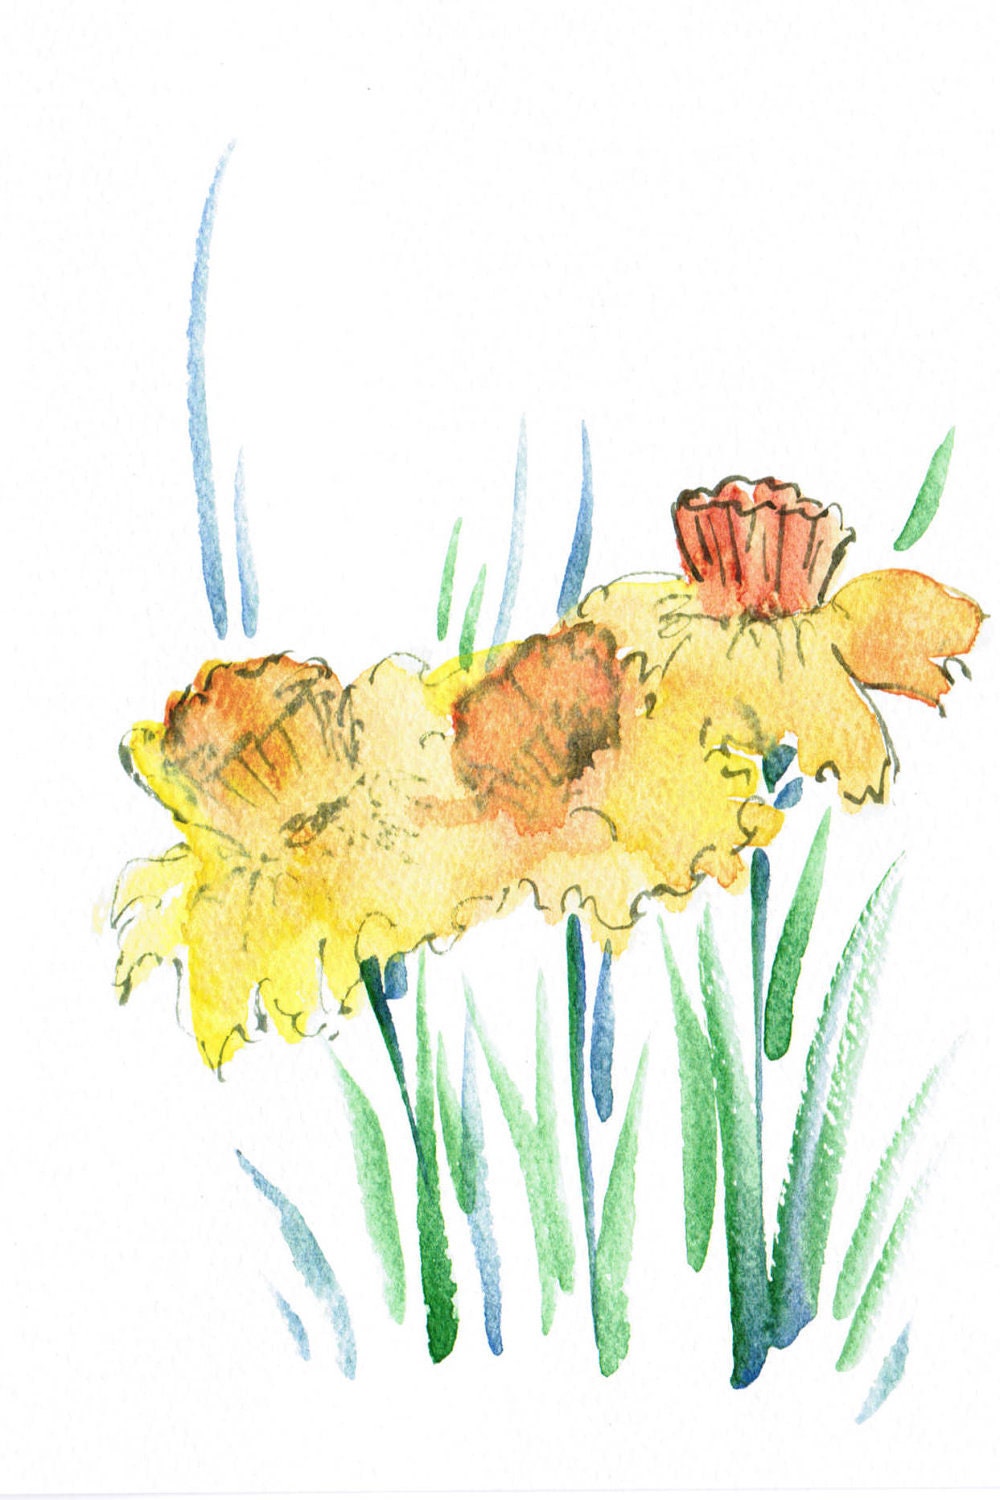 CIJ Handpainted Greeting Card Yellow Daffodils Thank you notes Note cardsWedding Watercolor Art Any occasion Women Teens Blank under 10 - HandmadeExclusives